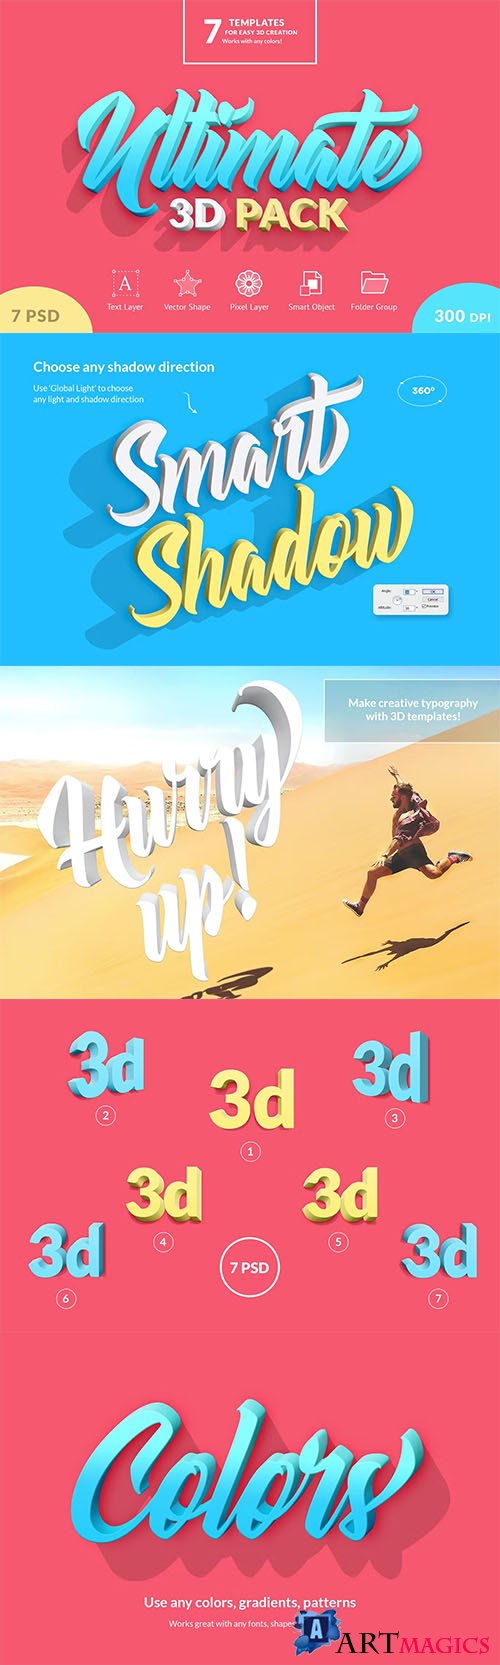 Ultimate 3D Templates Pack PSD